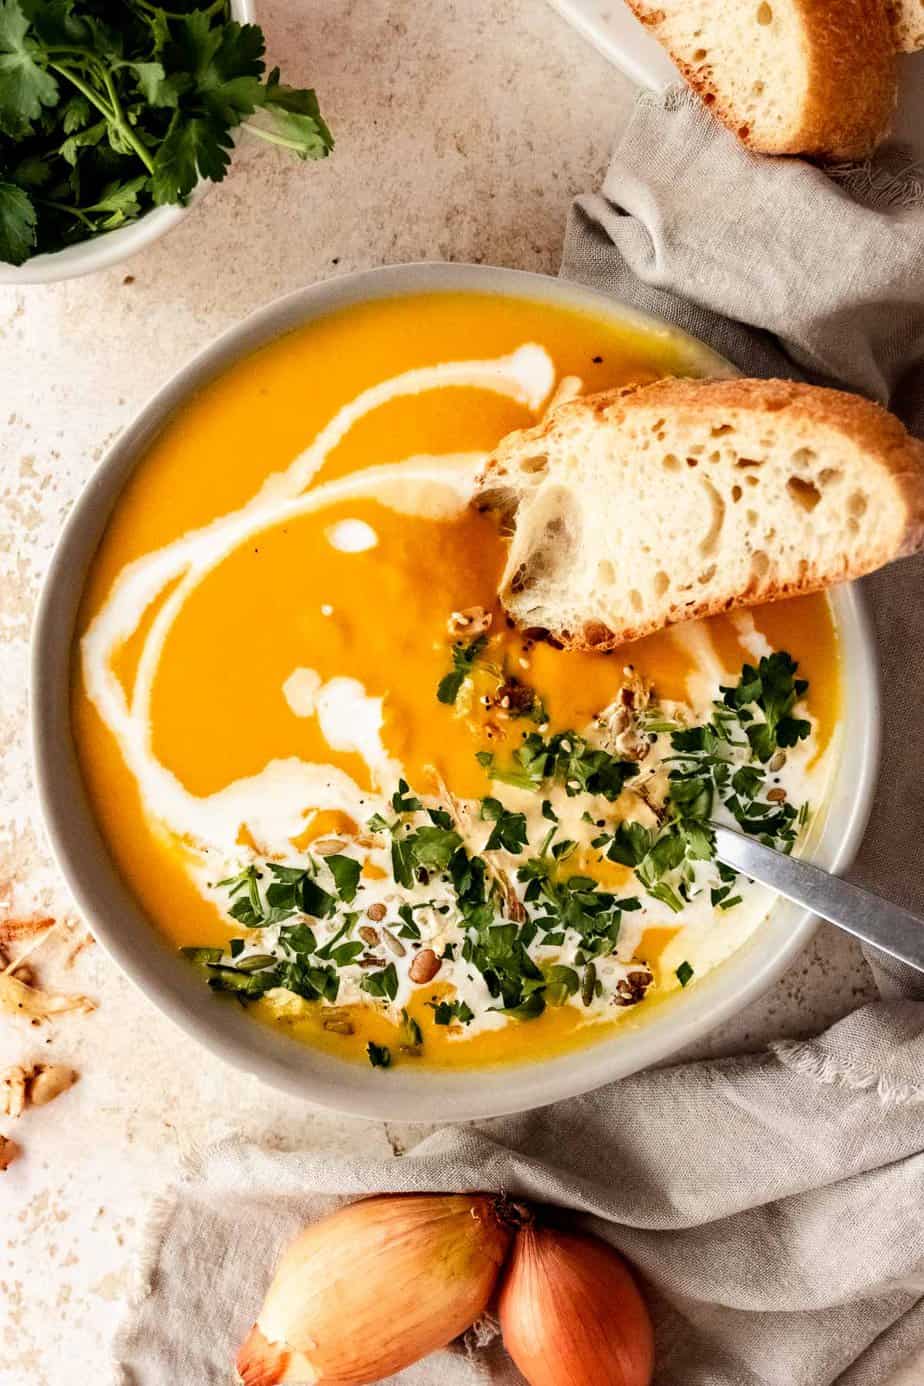 A large bowl of pumpkin soup with a spoon. The soup is garnished with fresh herbs, bread, cream, and seeds.